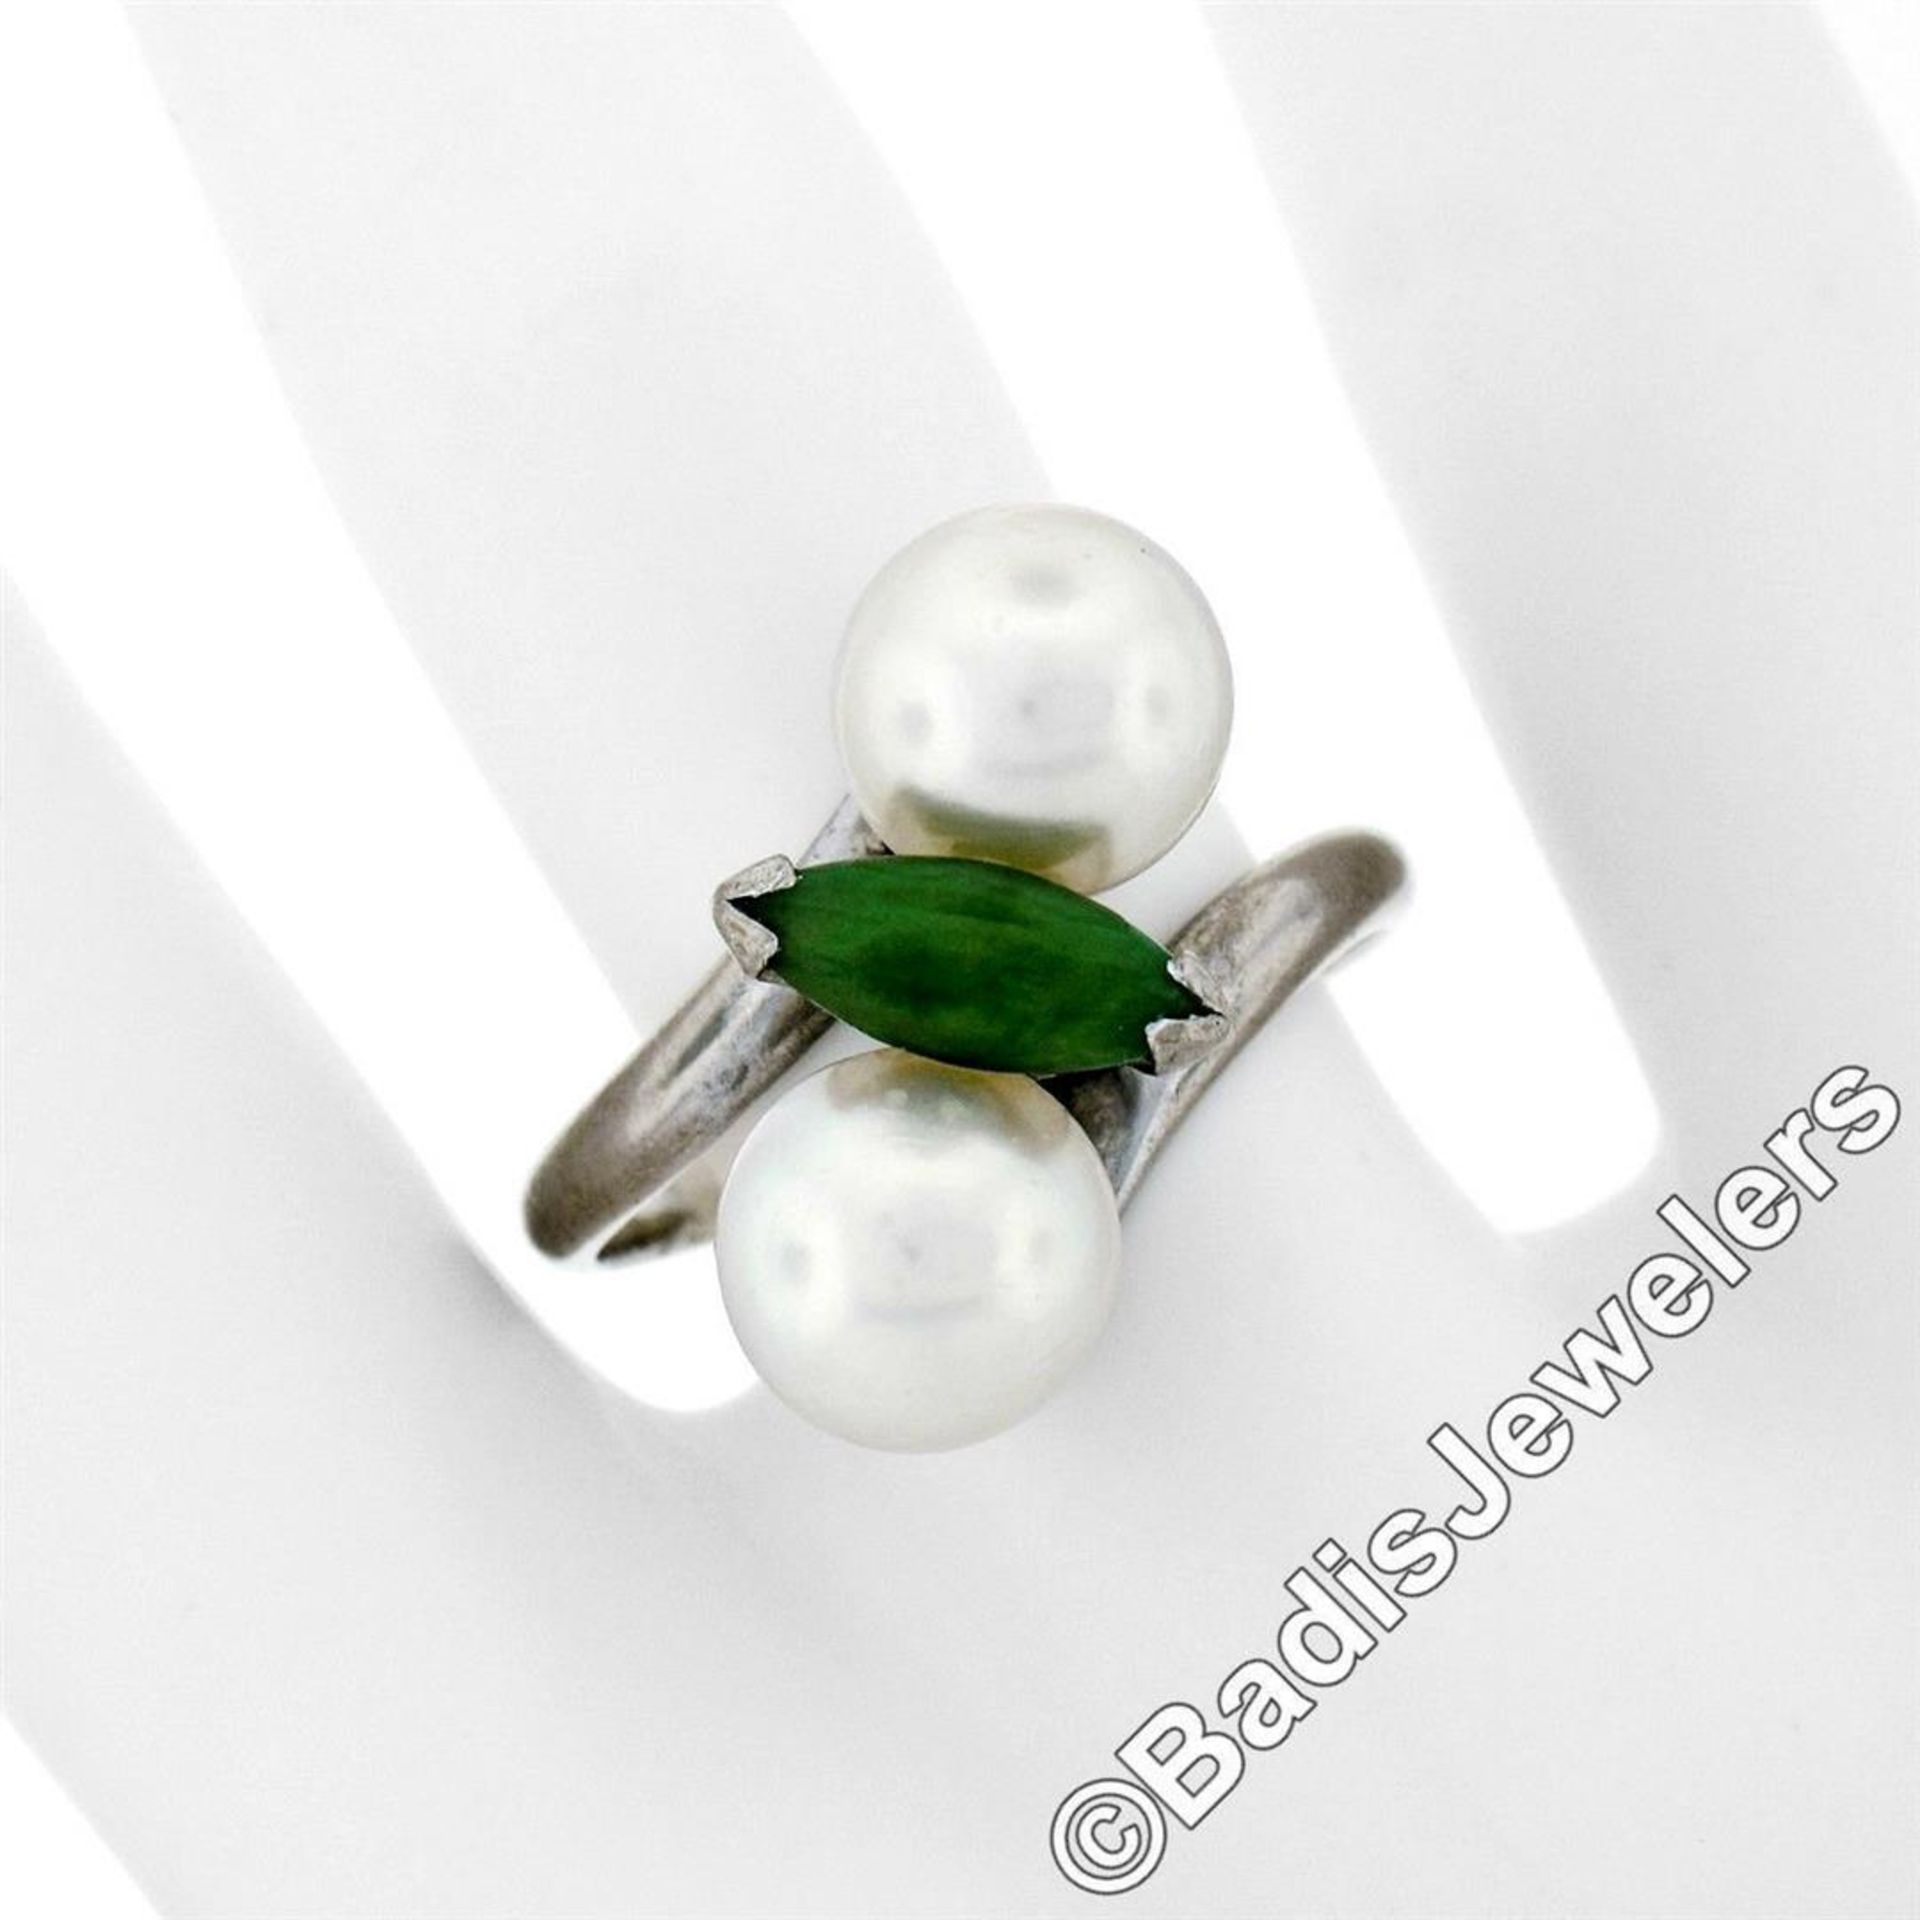 Vintage 14kt White Gold 8.35mm Round Pearl Marquise Cut Jade Bypass Ring - Image 3 of 7